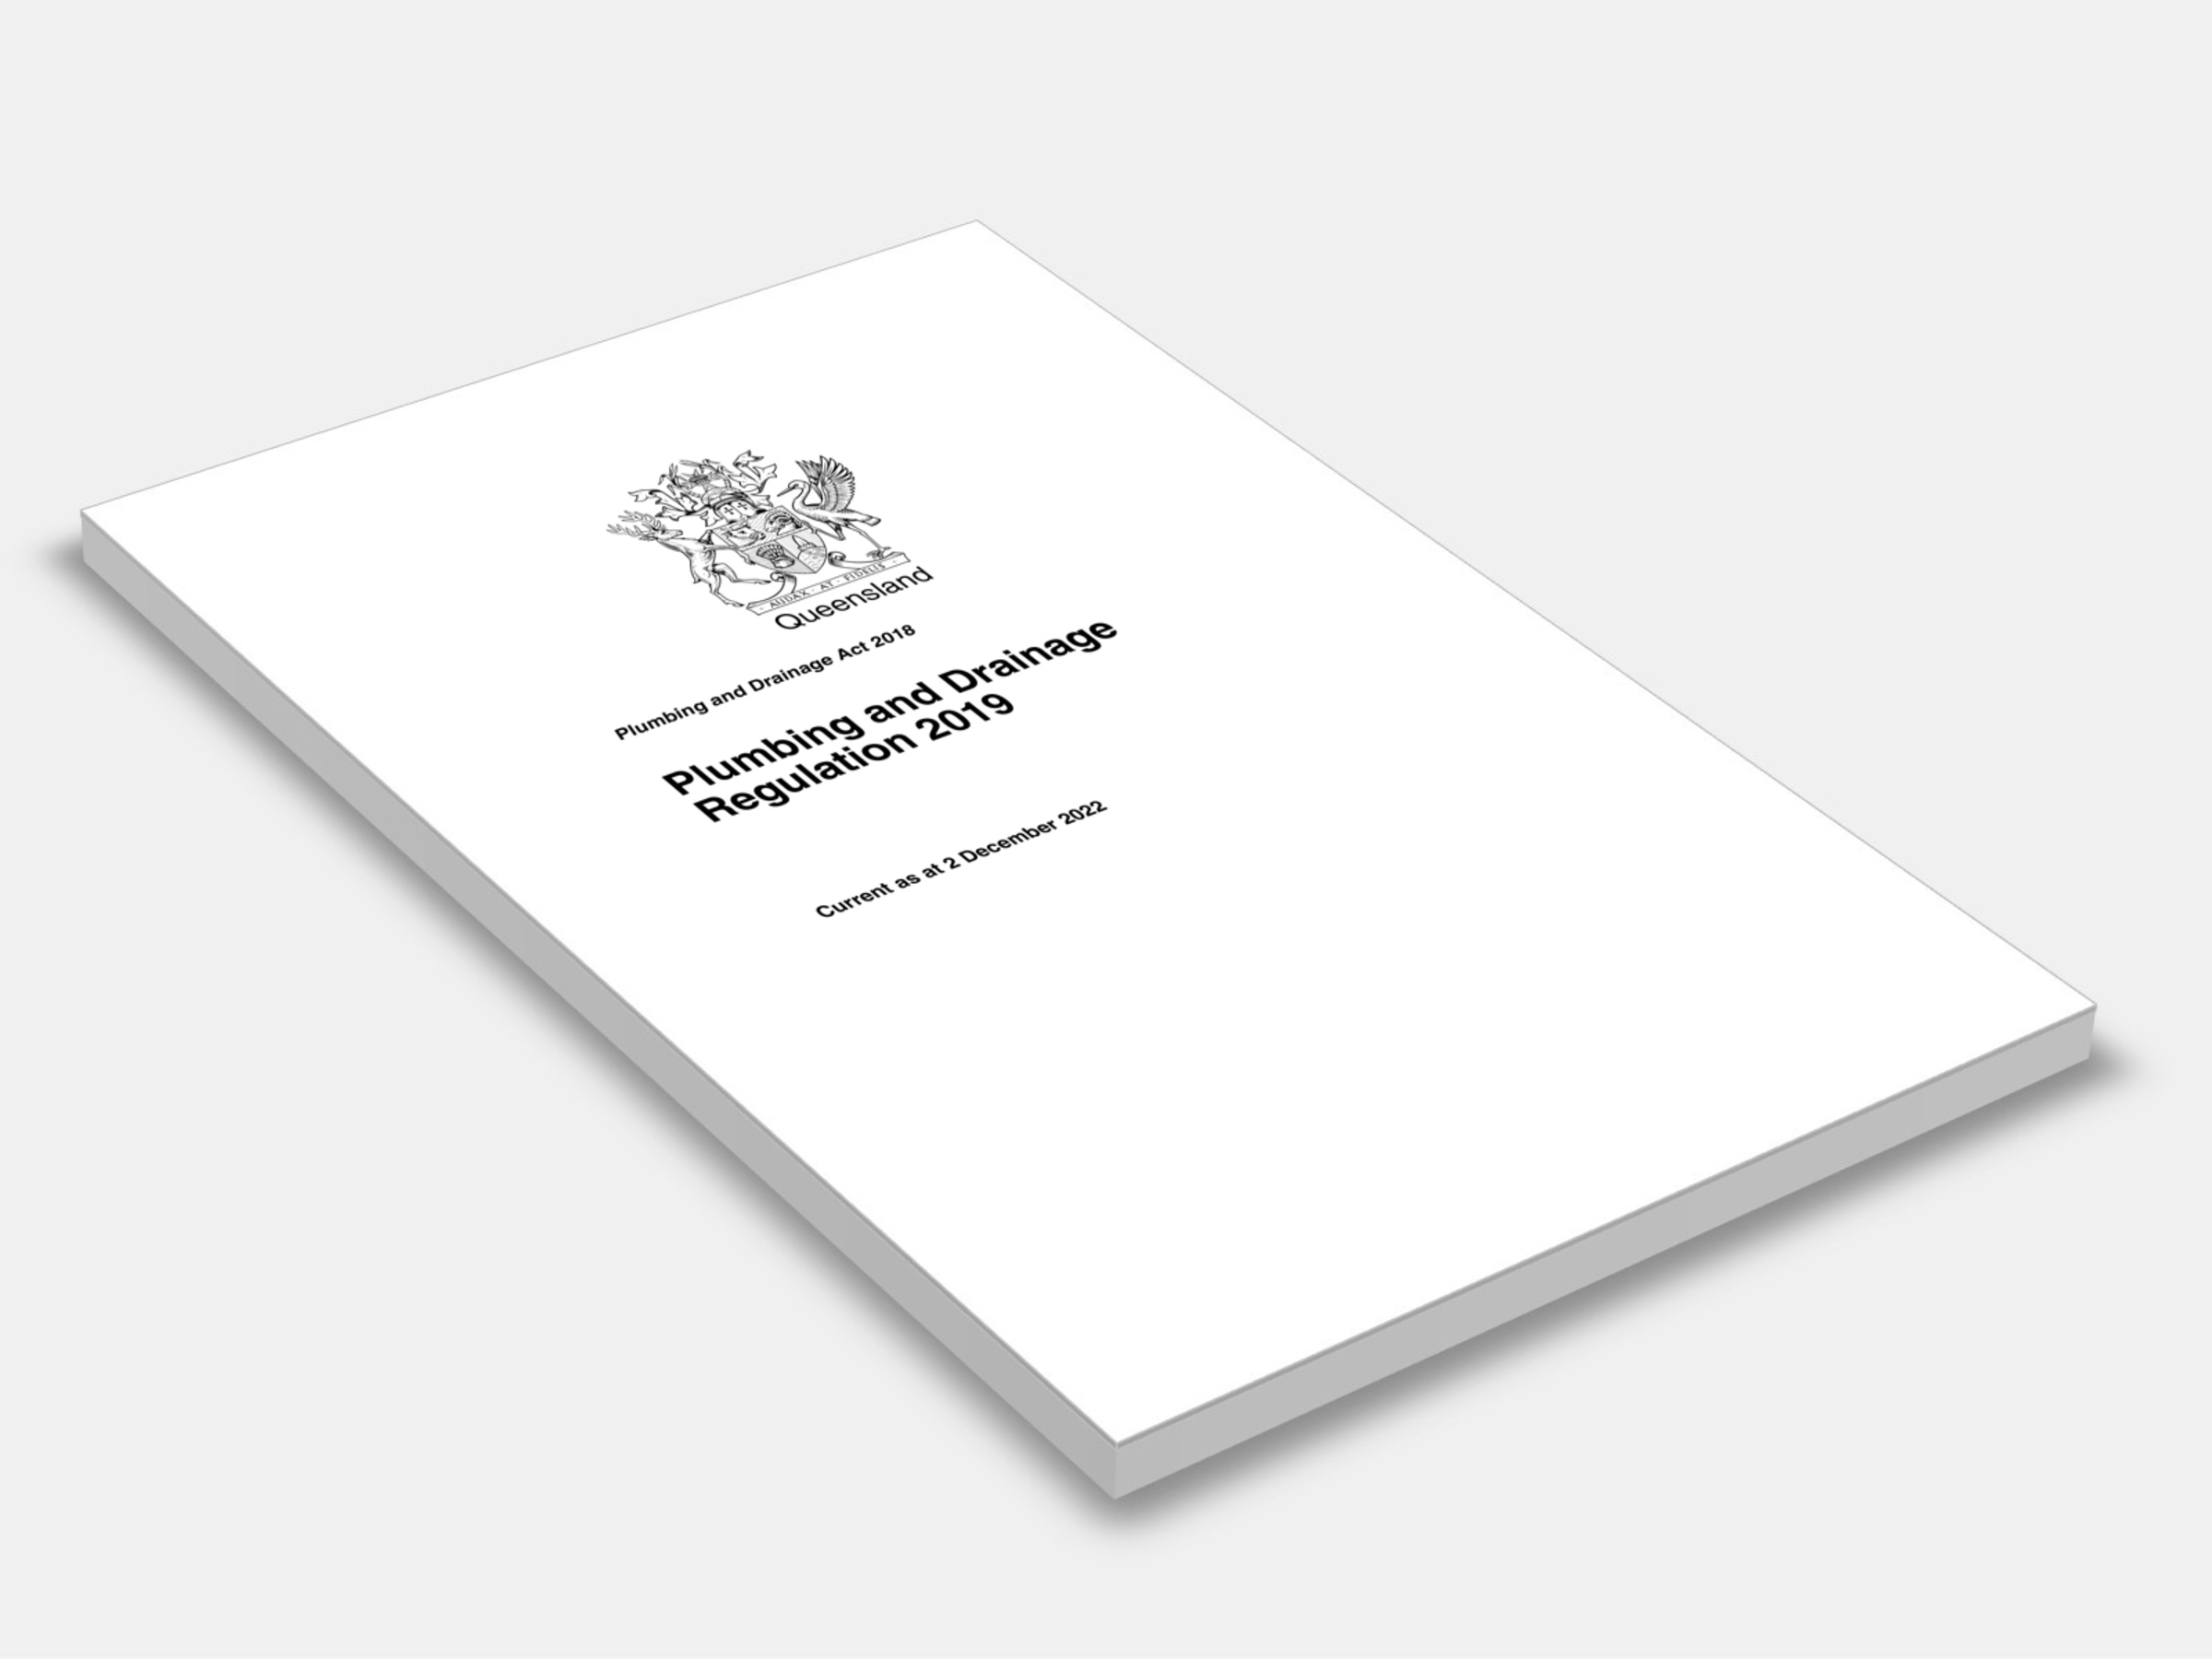 Plumbing and Drainage Regulation 2019 cover